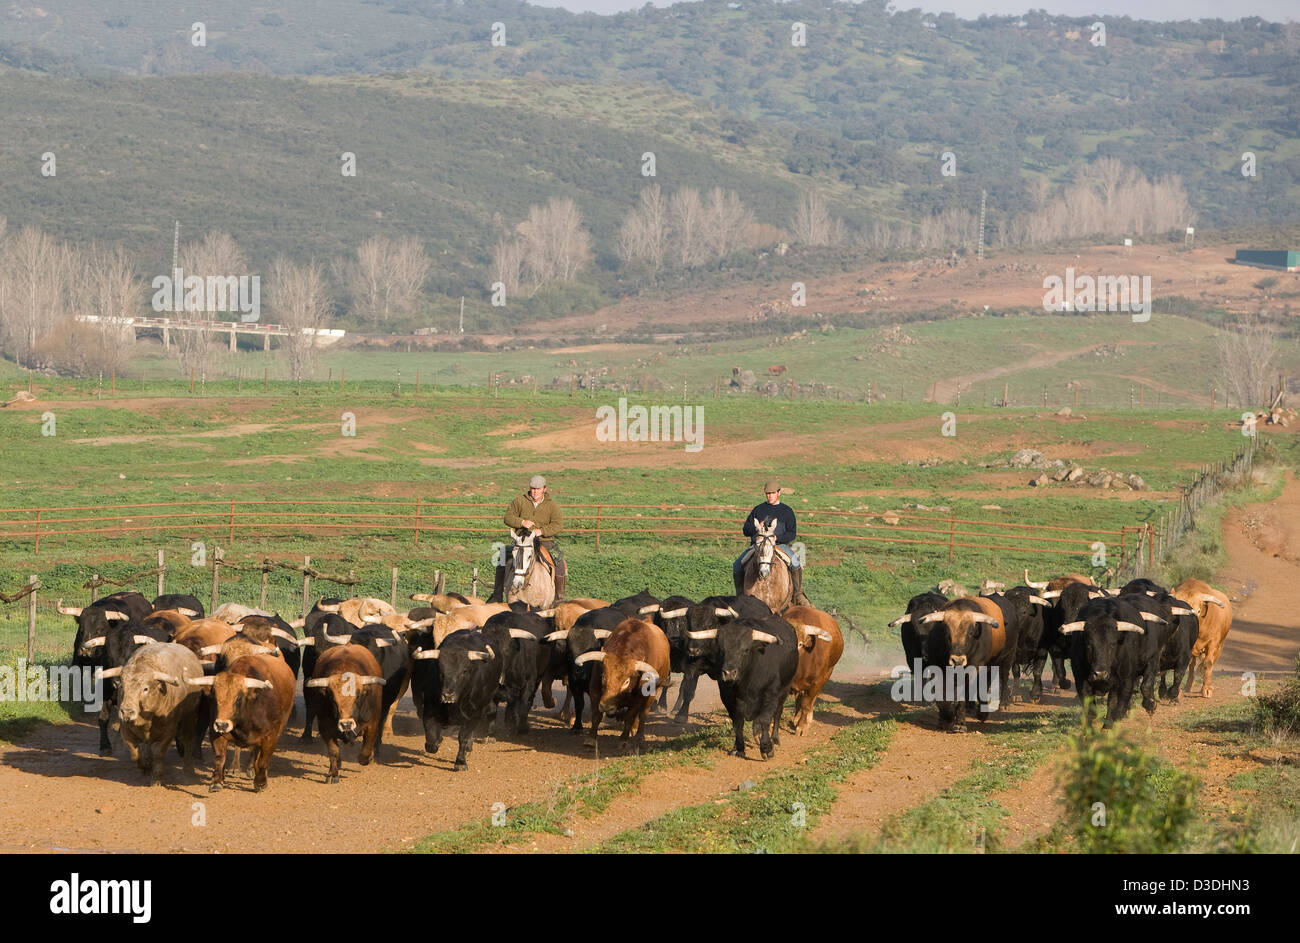 El CASTILLO DE LAS GUARDAS, SEVILLE, SPAIN, 24th FEBRUARY 2008:: Four year old bulls are driven to new pasture by horsemen at Juan Pedro Domecq's 7,000 acre ganaderia or bull breeding farm.  All these bulls are destined to fight in the ring this season. Stock Photo